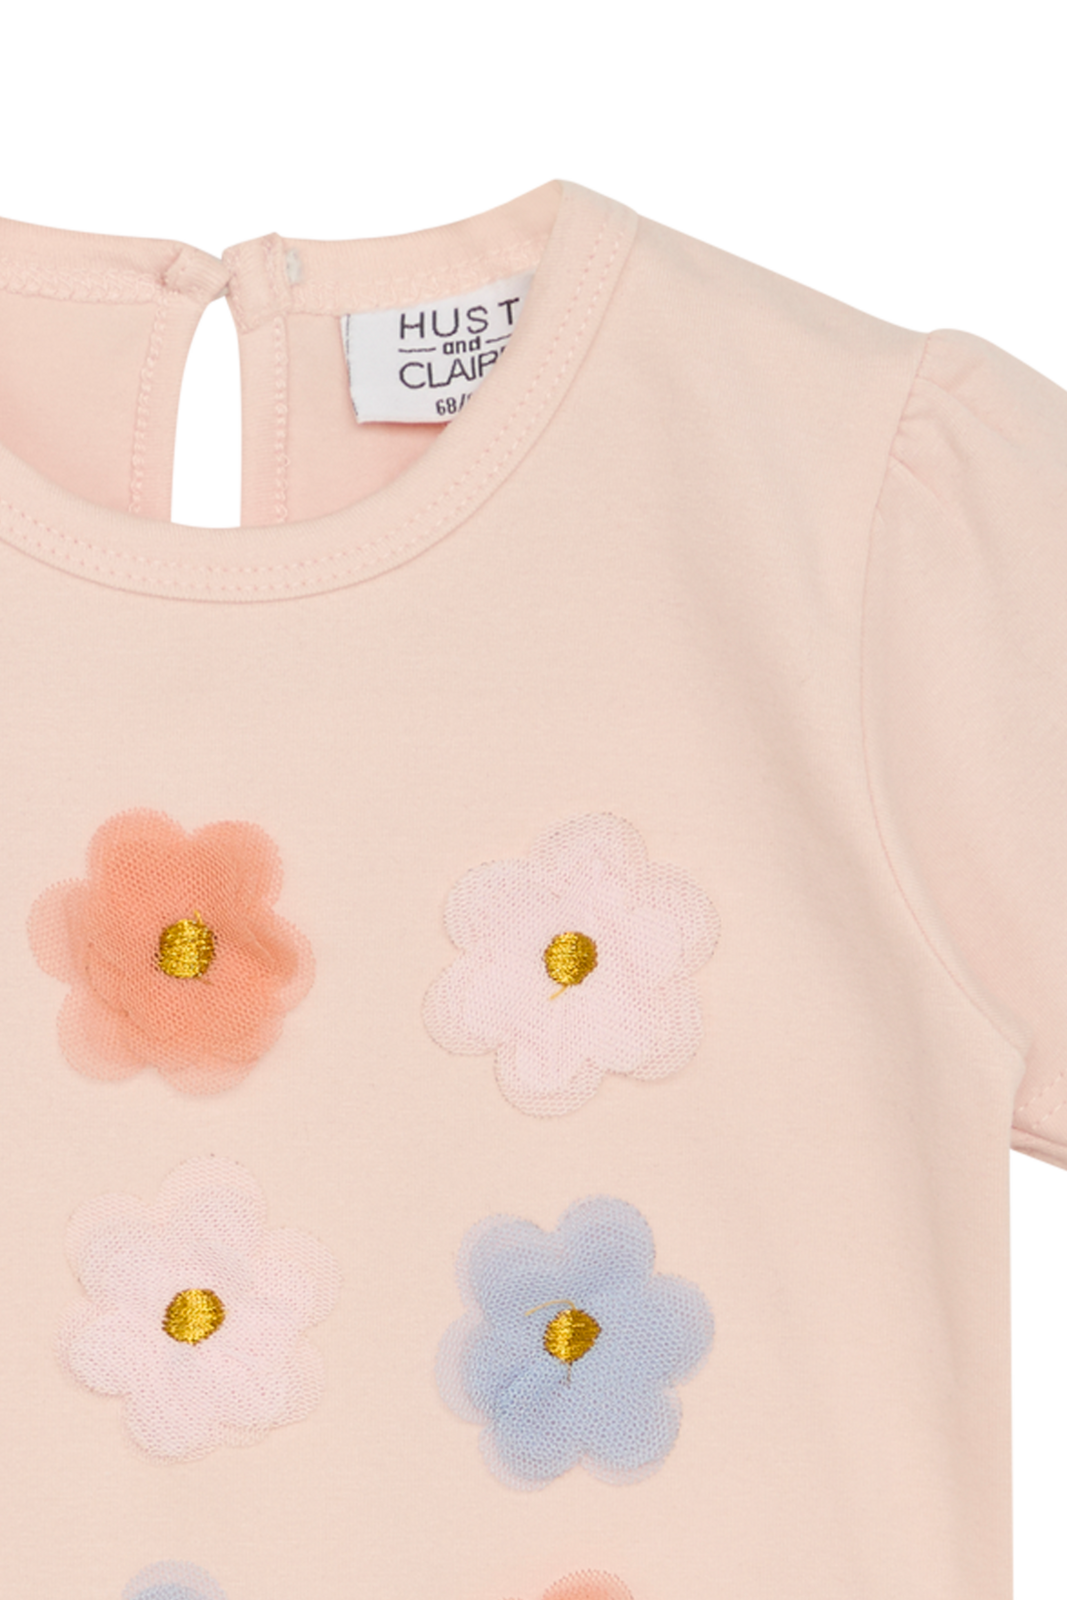 Hust and Claire  Baby T-Shirt Aliana 